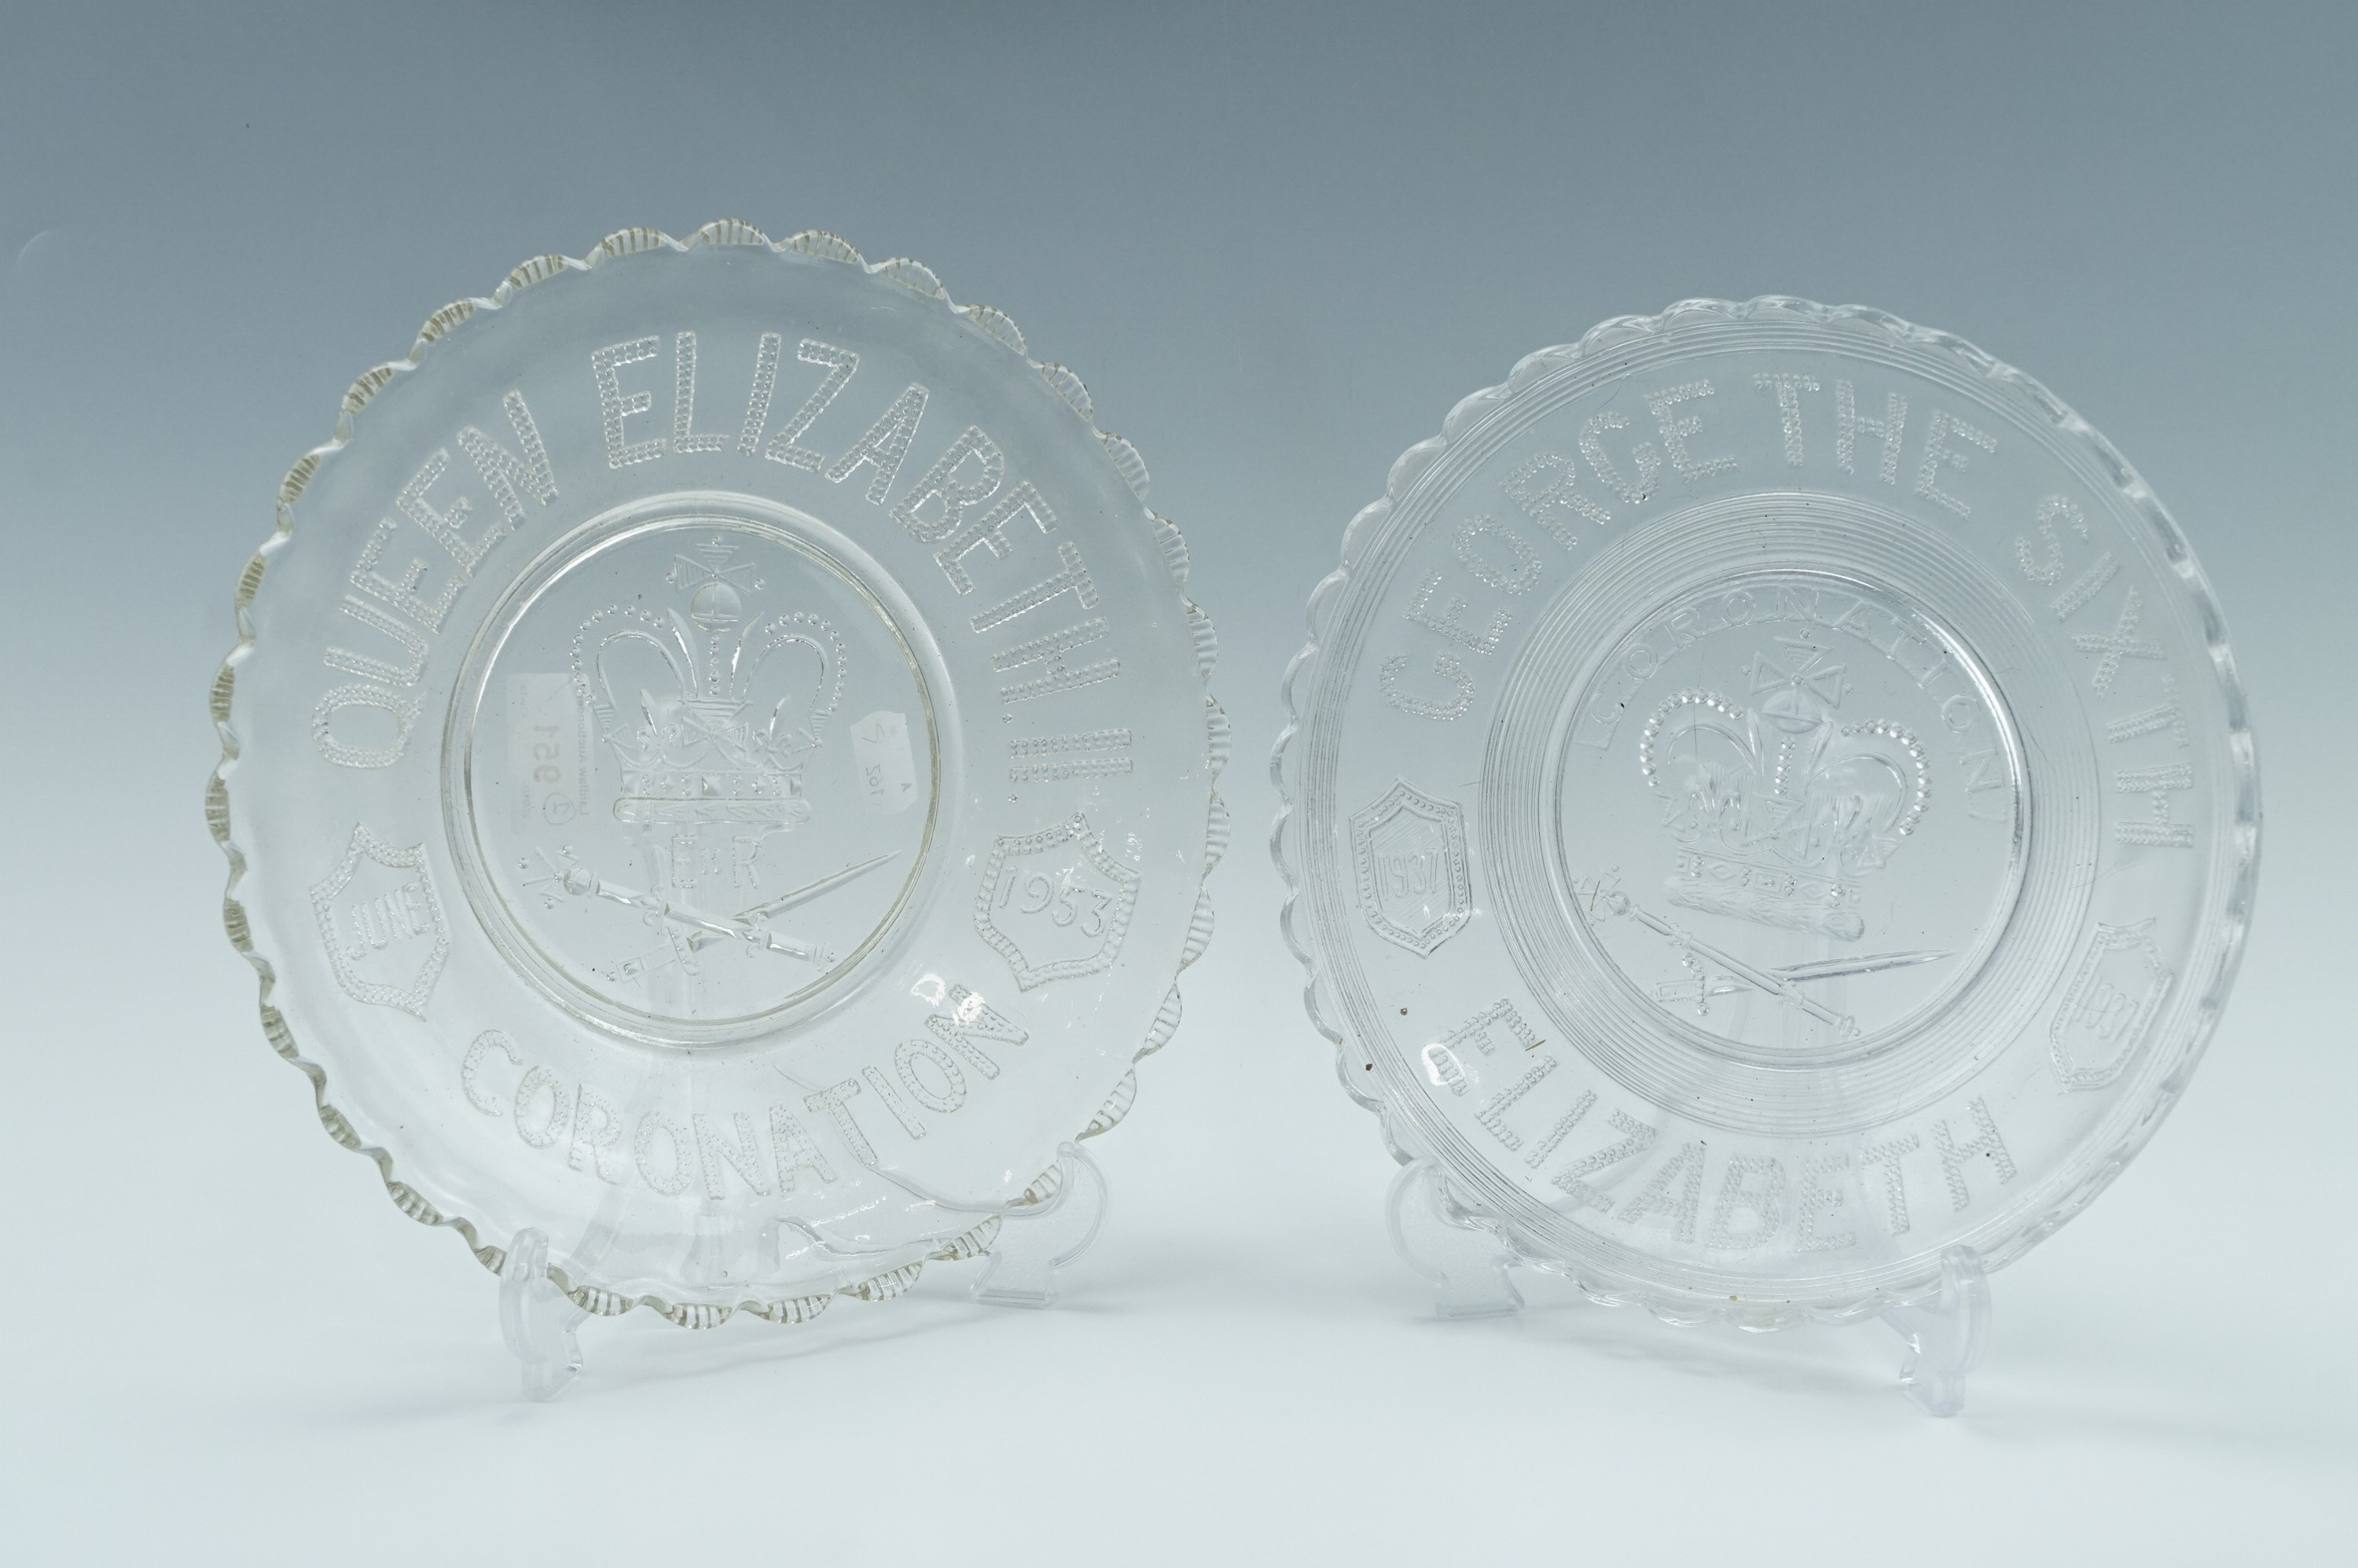 Two pressed glass royal commemorative plates, for the 1937 George VI and 1953 QEII coronations